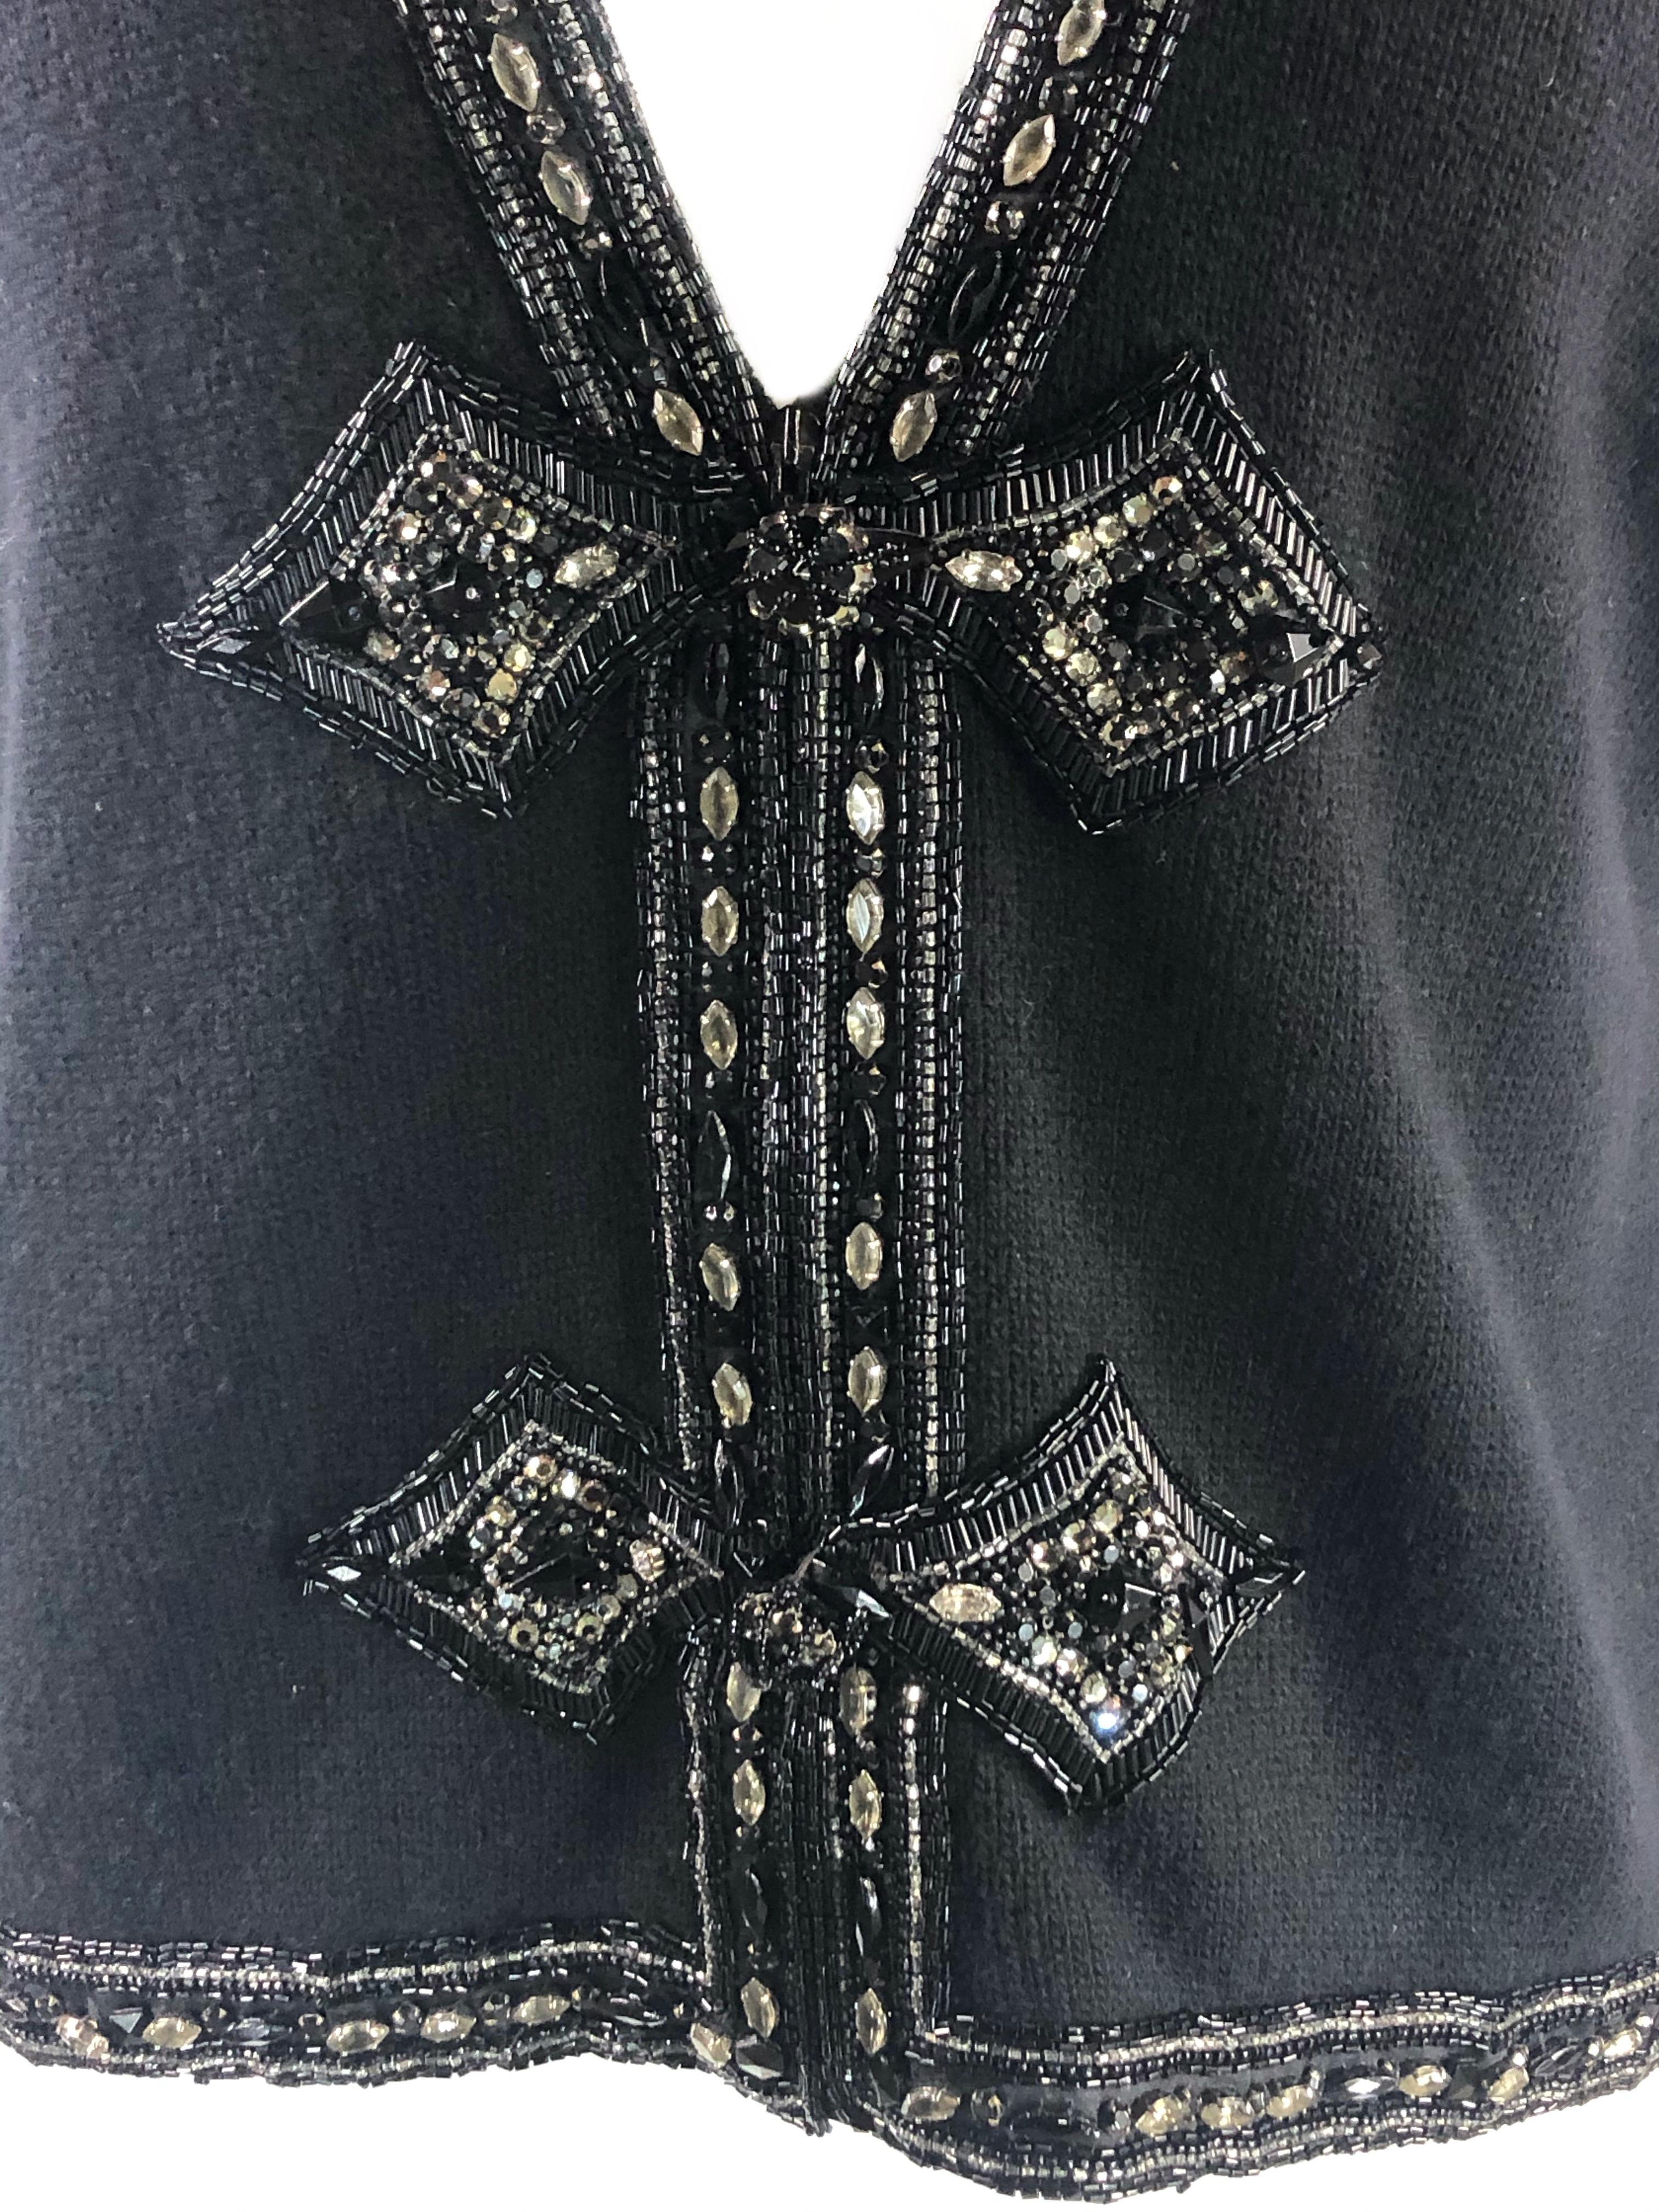 Vintage VALENTINO Night Black Knit Vest w/ Rhinestone Size M

Product details:
Size M
Front zip closure, measures 11” long
Rhinestone detail 
Made in Italy
